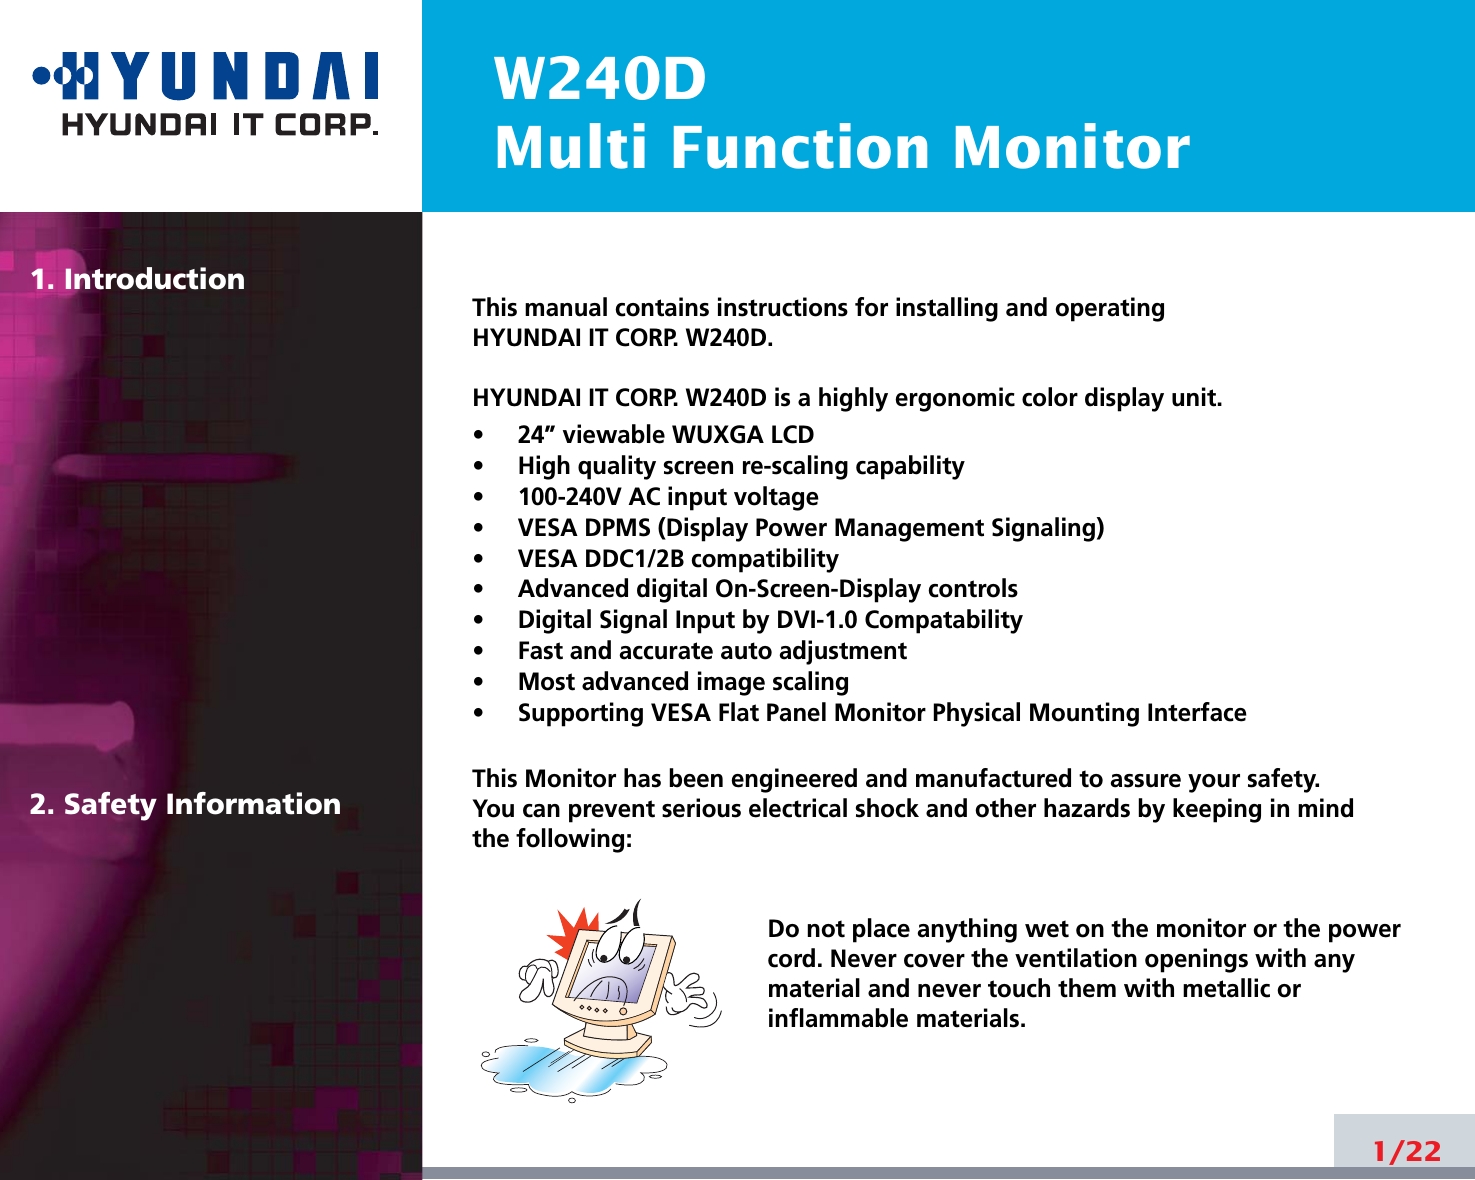 W240DMulti Function Monitor1. Introduction2. Safety Information1/22This manual contains instructions for installing and operatingHYUNDAI IT CORP. W240D.HYUNDAI IT CORP. W240D is a highly ergonomic color display unit.•     24” viewable WUXGA LCD•     High quality screen re-scaling capability•     100-240V AC input voltage•     VESA DPMS (Display Power Management Signaling)•     VESA DDC1/2B compatibility•     Advanced digital On-Screen-Display controls•     Digital Signal Input by DVI-1.0 Compatability•     Fast and accurate auto adjustment  •     Most advanced image scaling•     Supporting VESA Flat Panel Monitor Physical Mounting InterfaceThis Monitor has been engineered and manufactured to assure your safety. You can prevent serious electrical shock and other hazards by keeping in mind the following:Do not place anything wet on the monitor or the powercord. Never cover the ventilation openings with anymaterial and never touch them with metallic or inflammable materials.